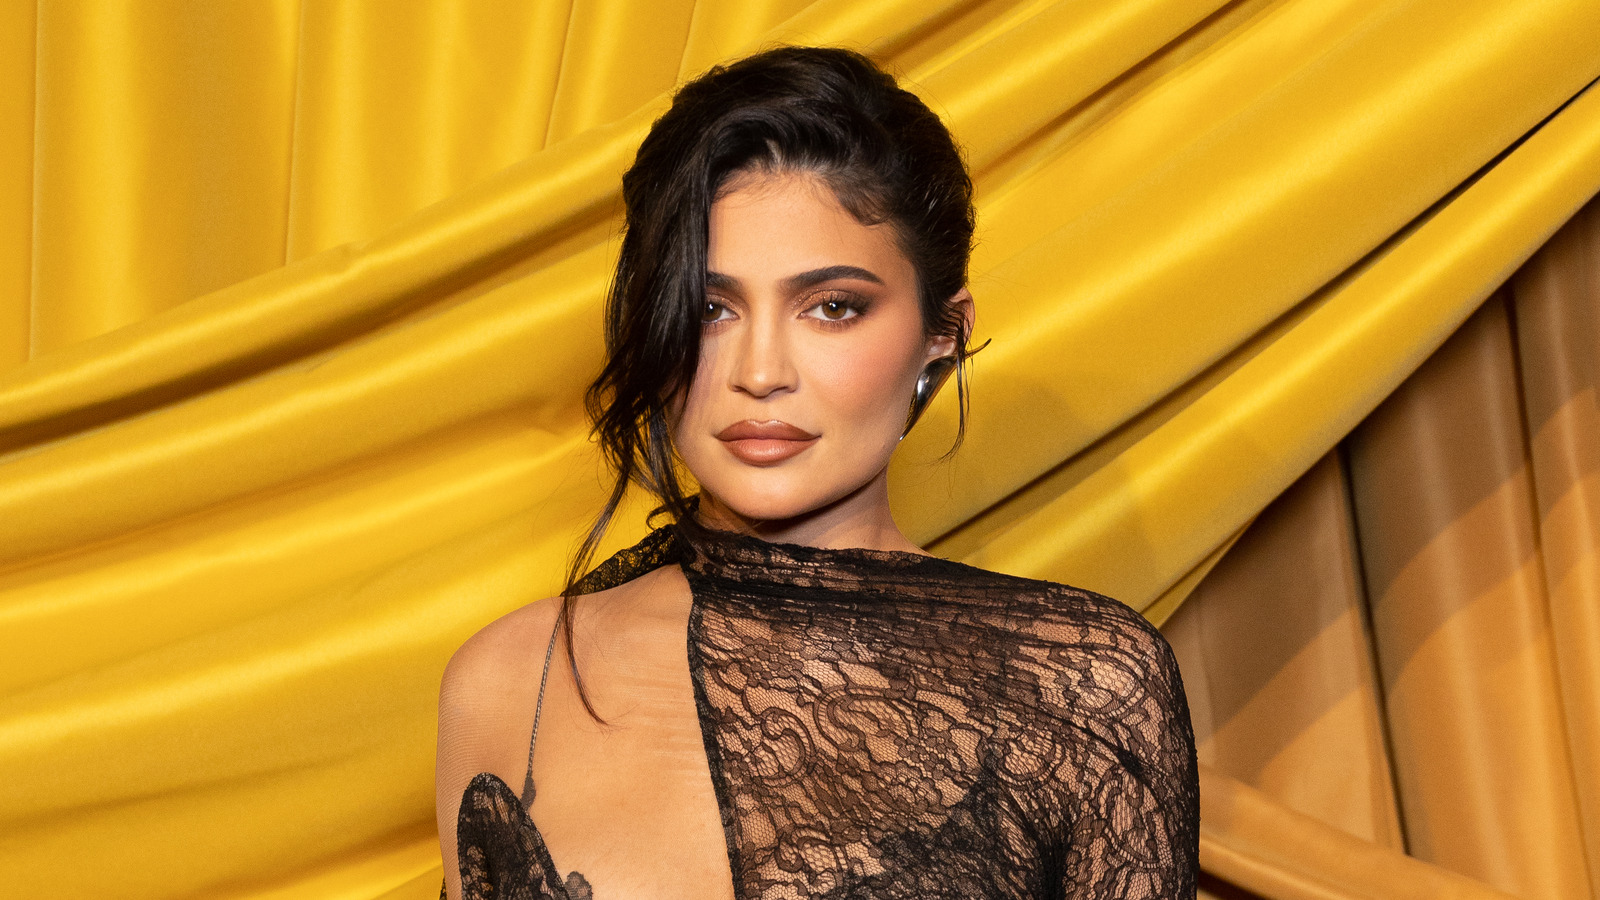 Kylie Jenner's Balmain Birthday Dress: Pricing Details, Photos and More